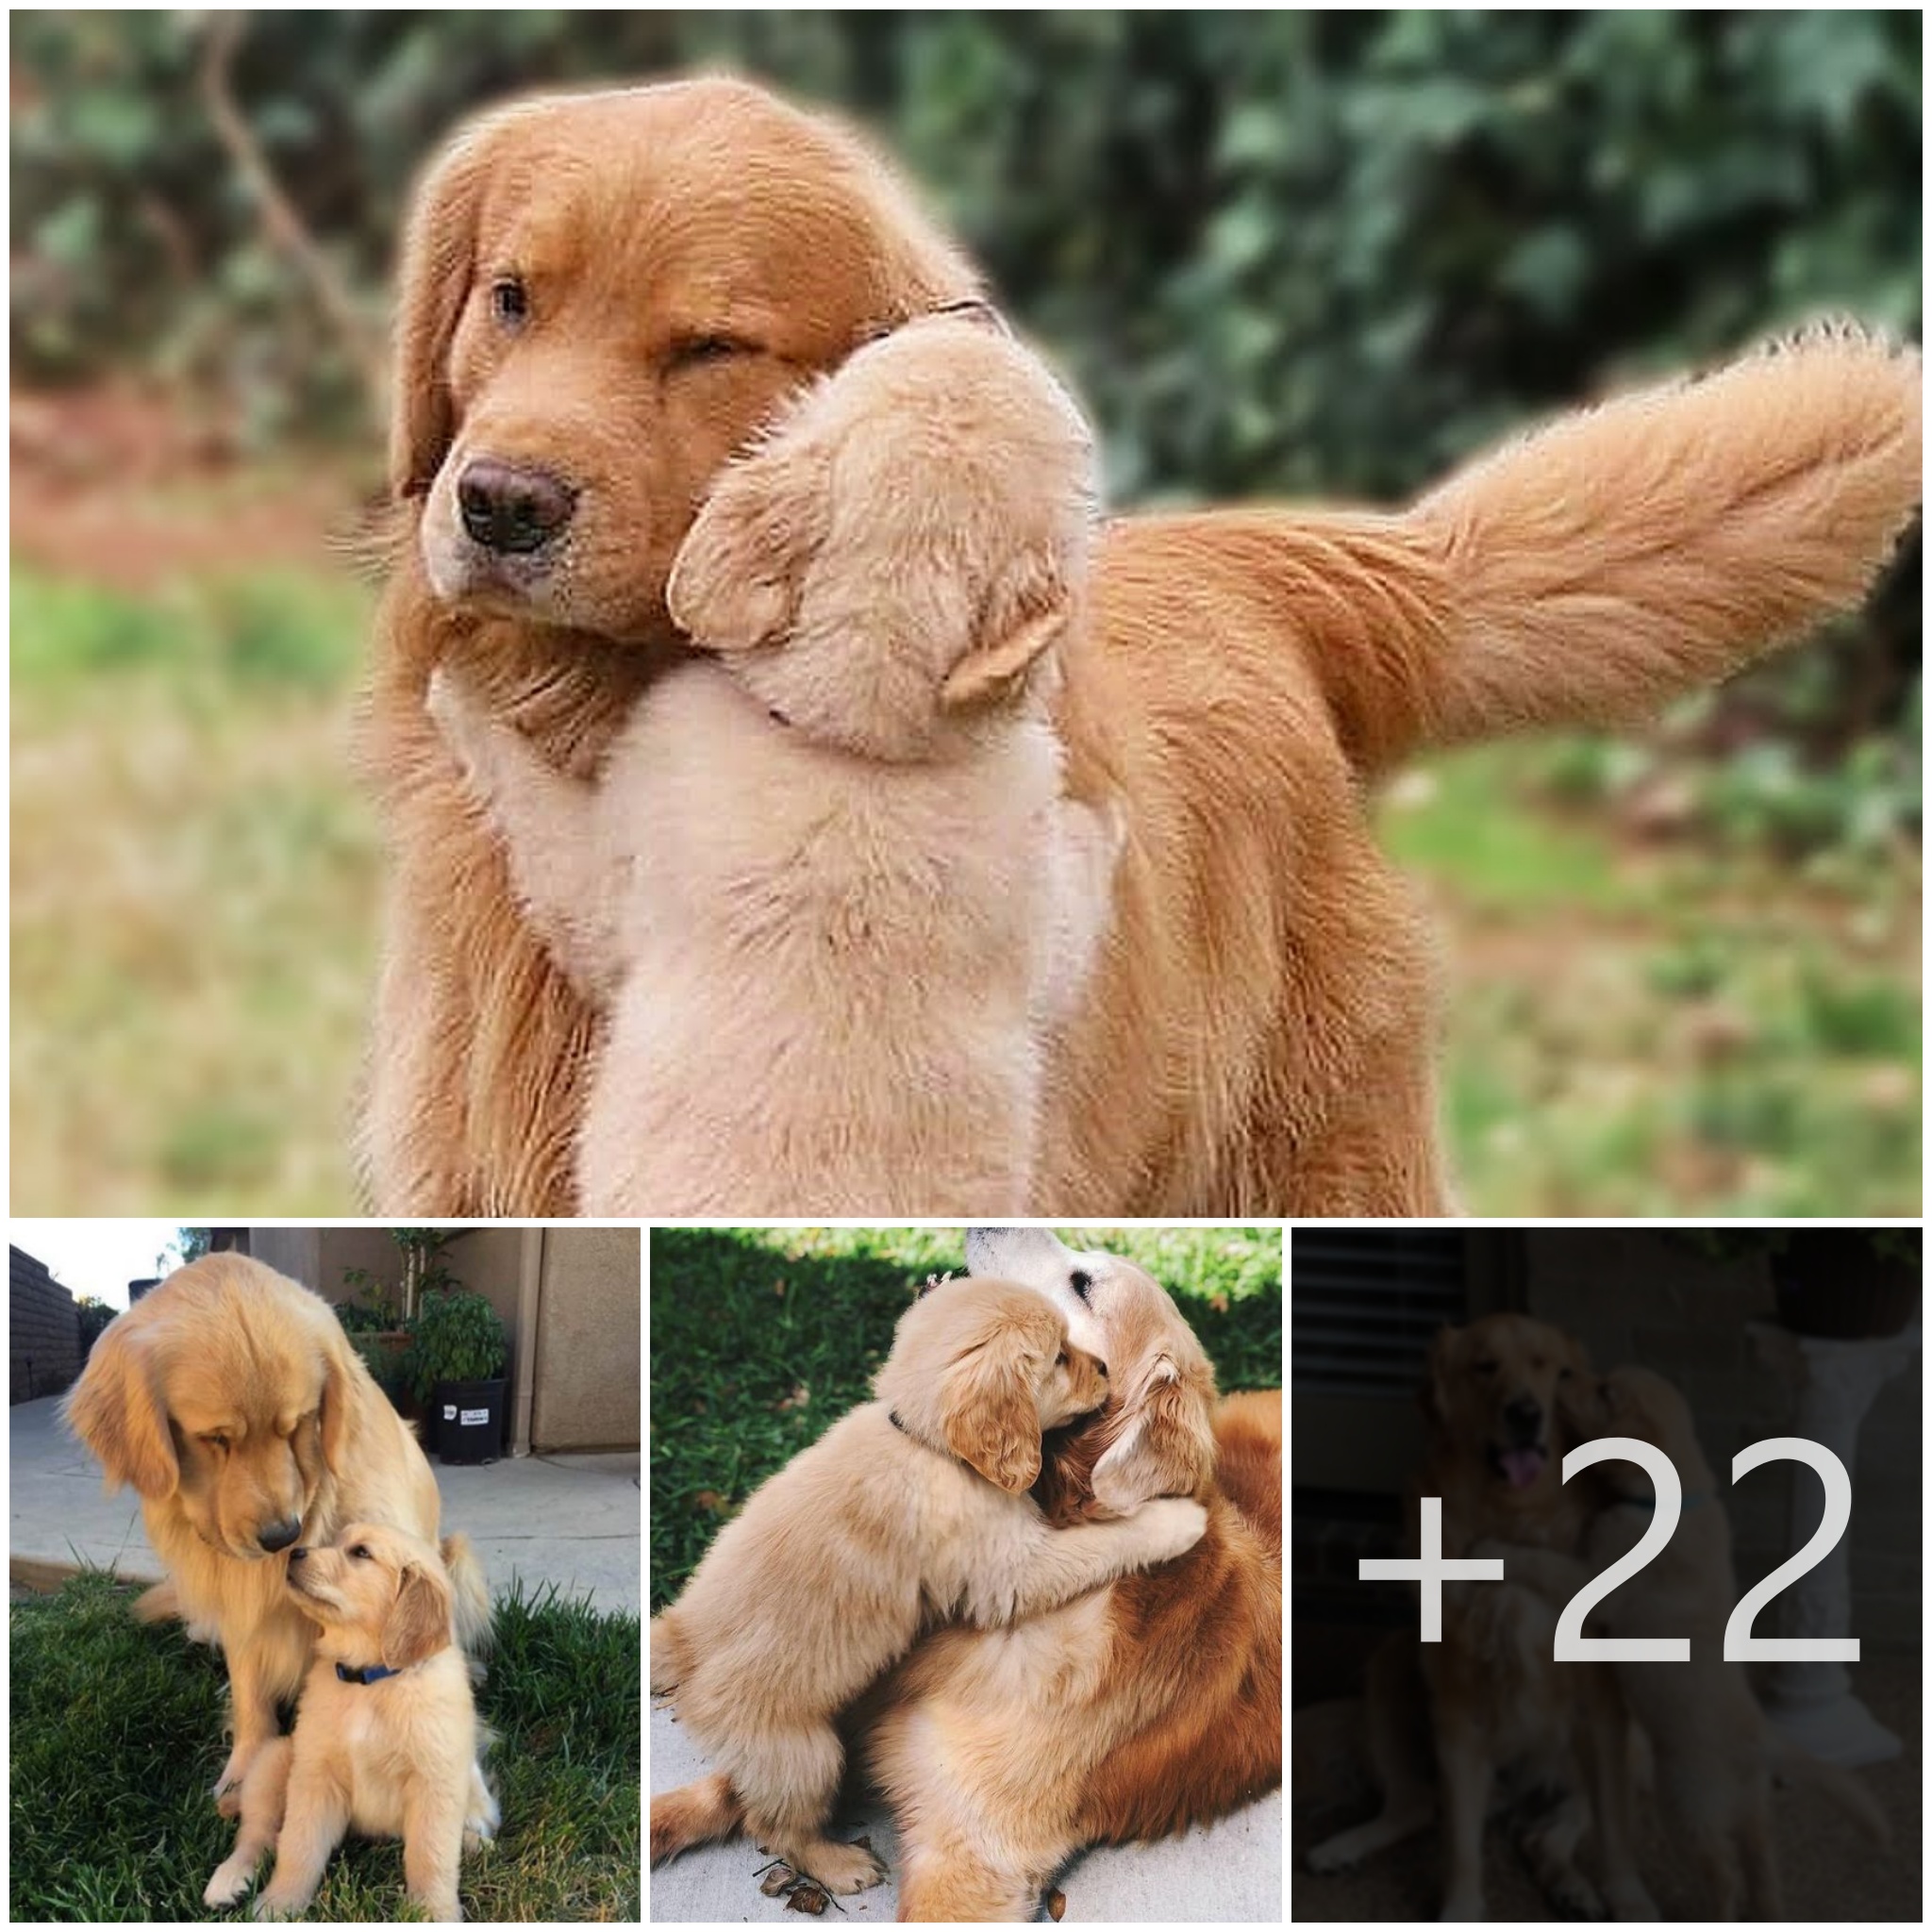 tho “Emotional Reunion: Witnessing the Puppy Reuniting with Its Mother Dog After Months of Separation Warmed the Hearts of Those Who Experienced Their Emotional Journey, Making Netizens Happy” tho